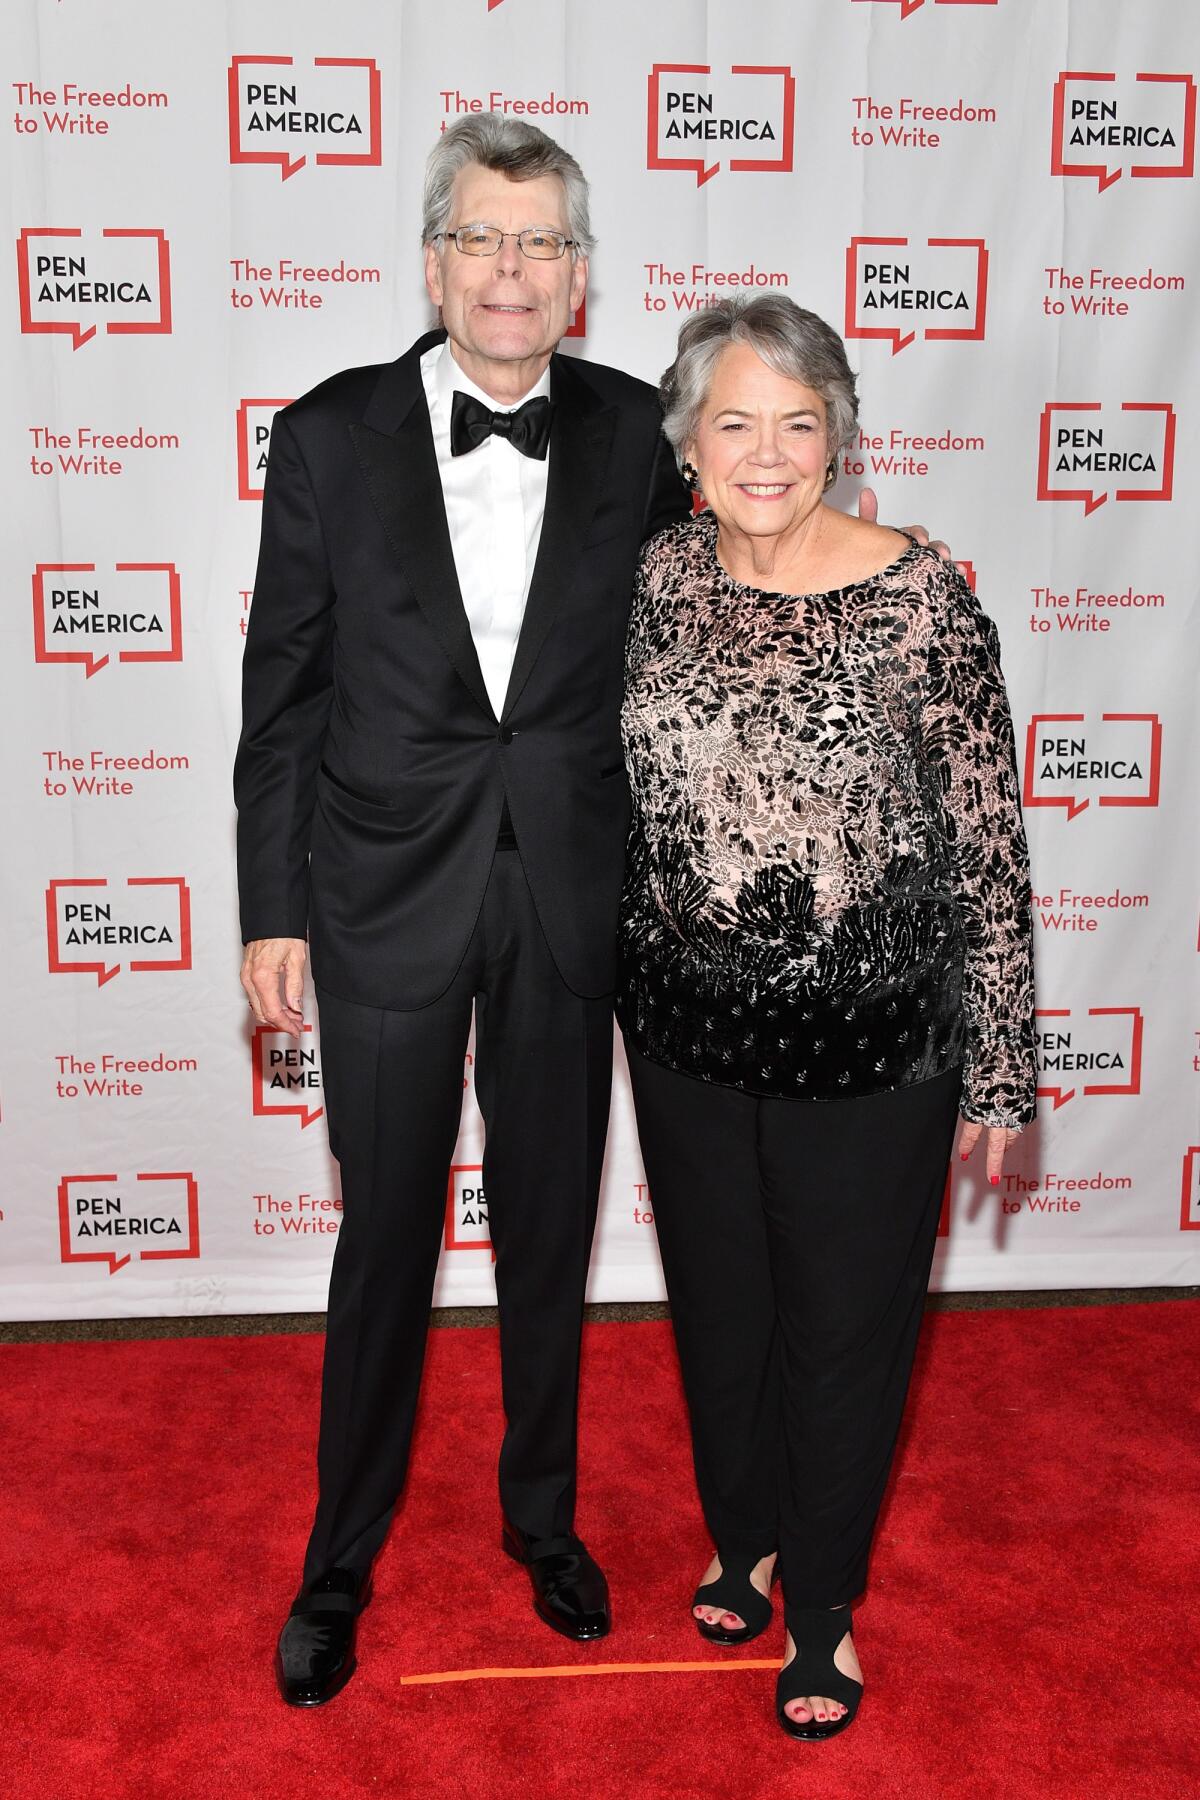 Carolyn Reidy and one of her authors, Stephen King, at the 2018 PEN Literary Gala in New York City.